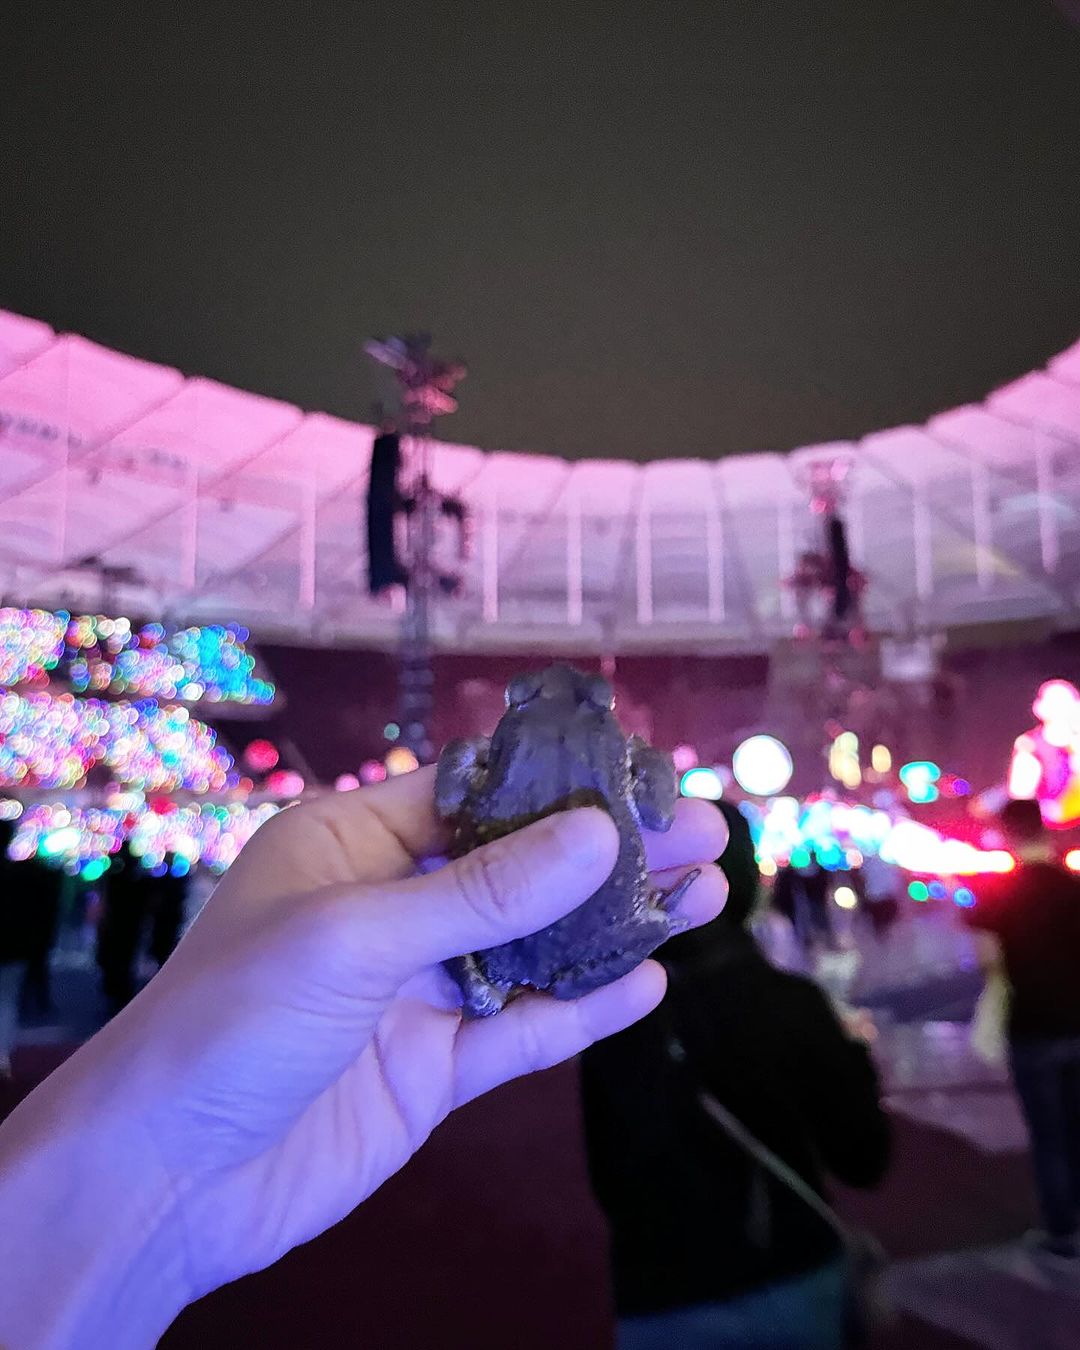 Joey holding a frog that she found on the ground inside the national stadium.